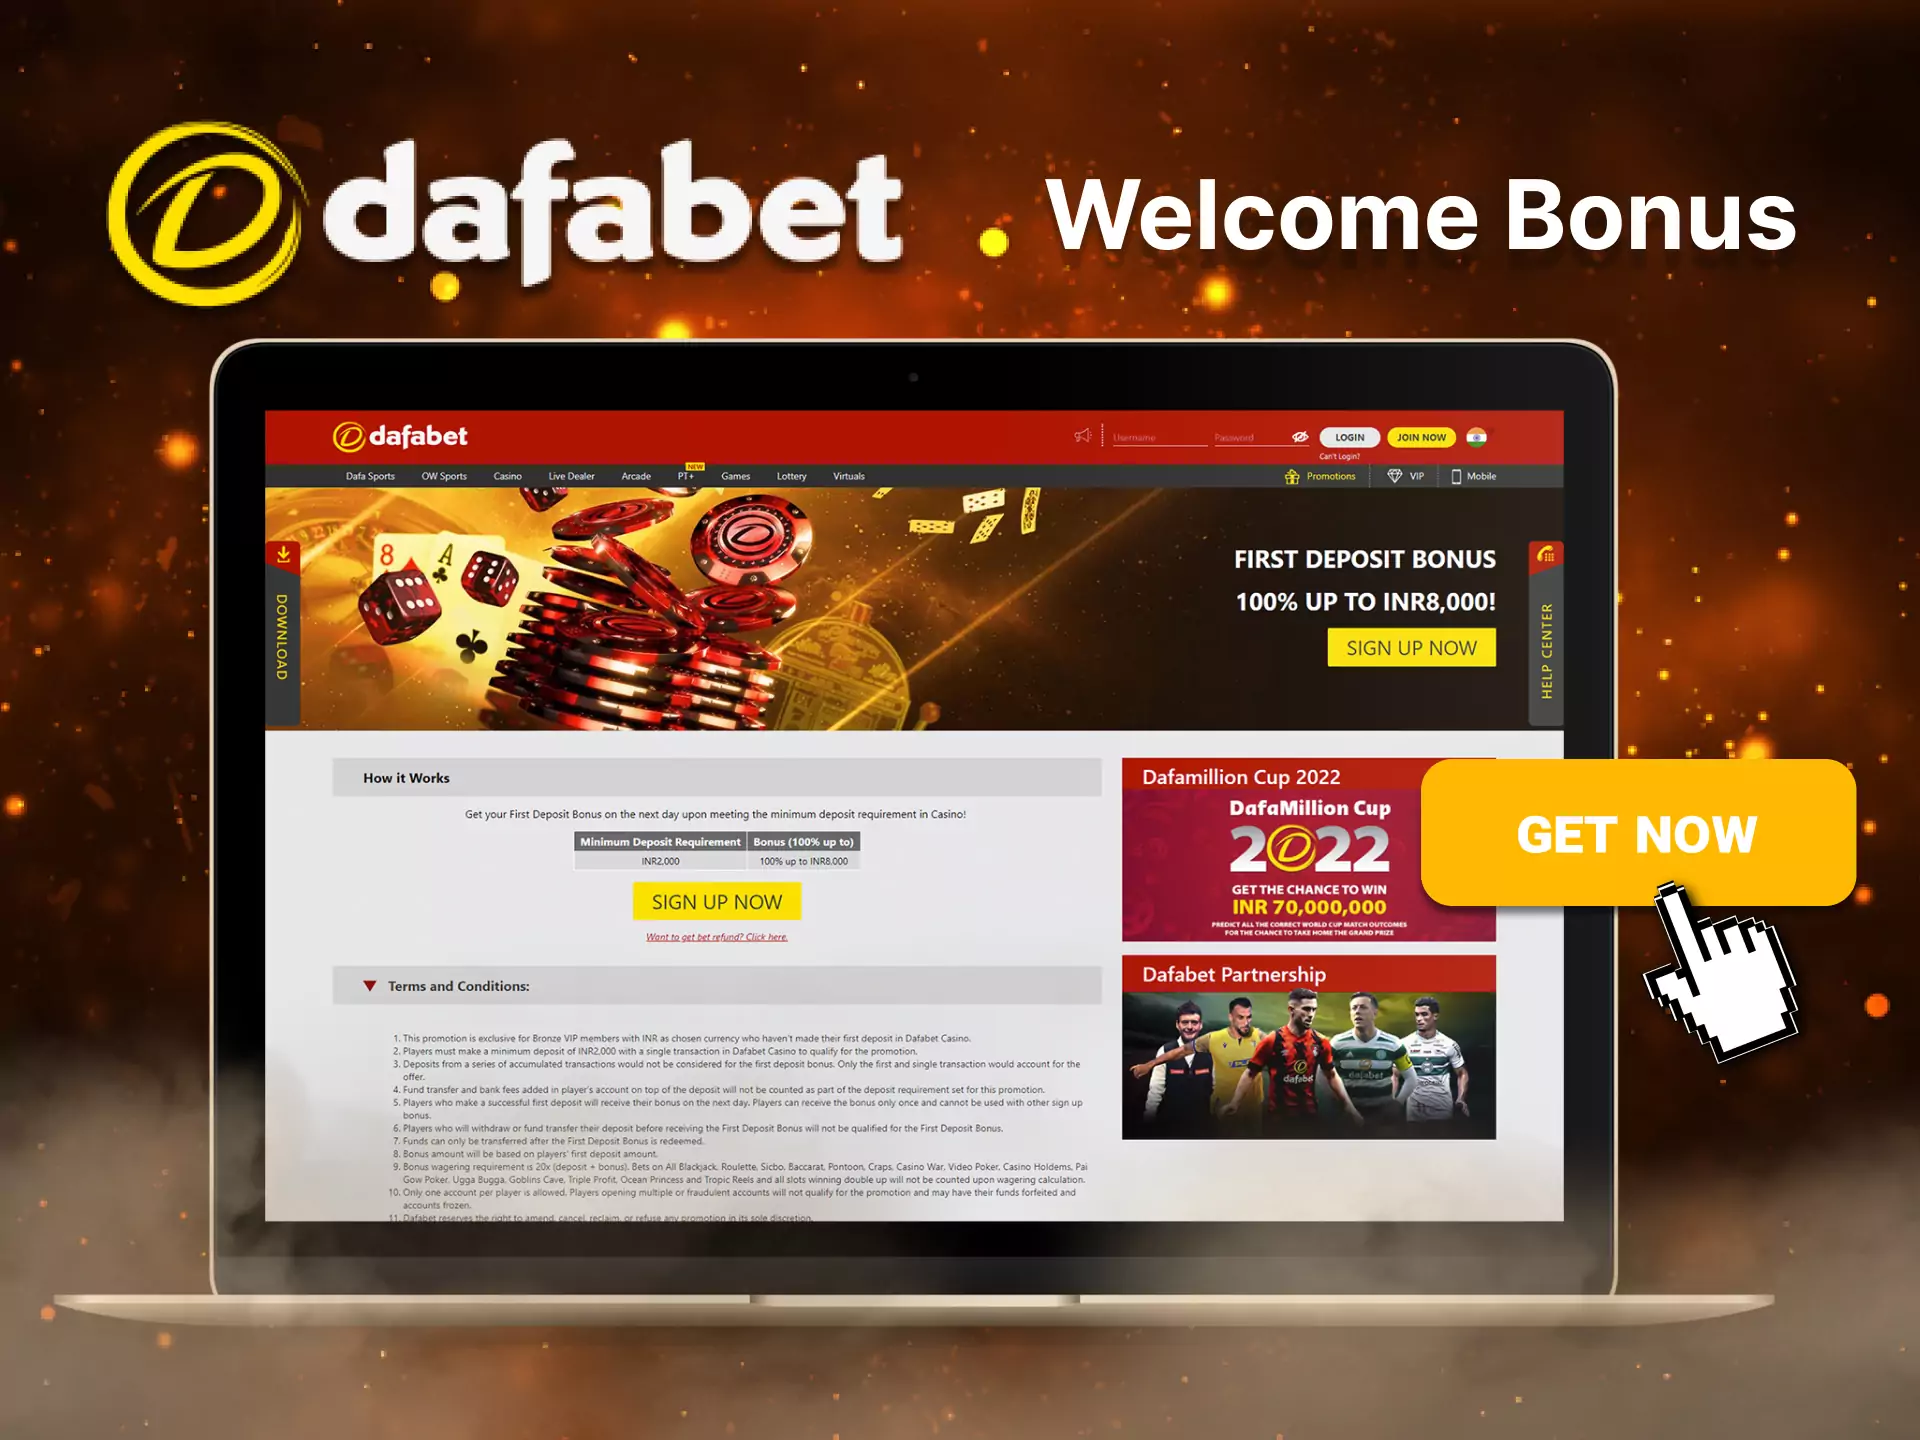 Use to the maximum all benefits of the Dafabet Welcome Bonus.